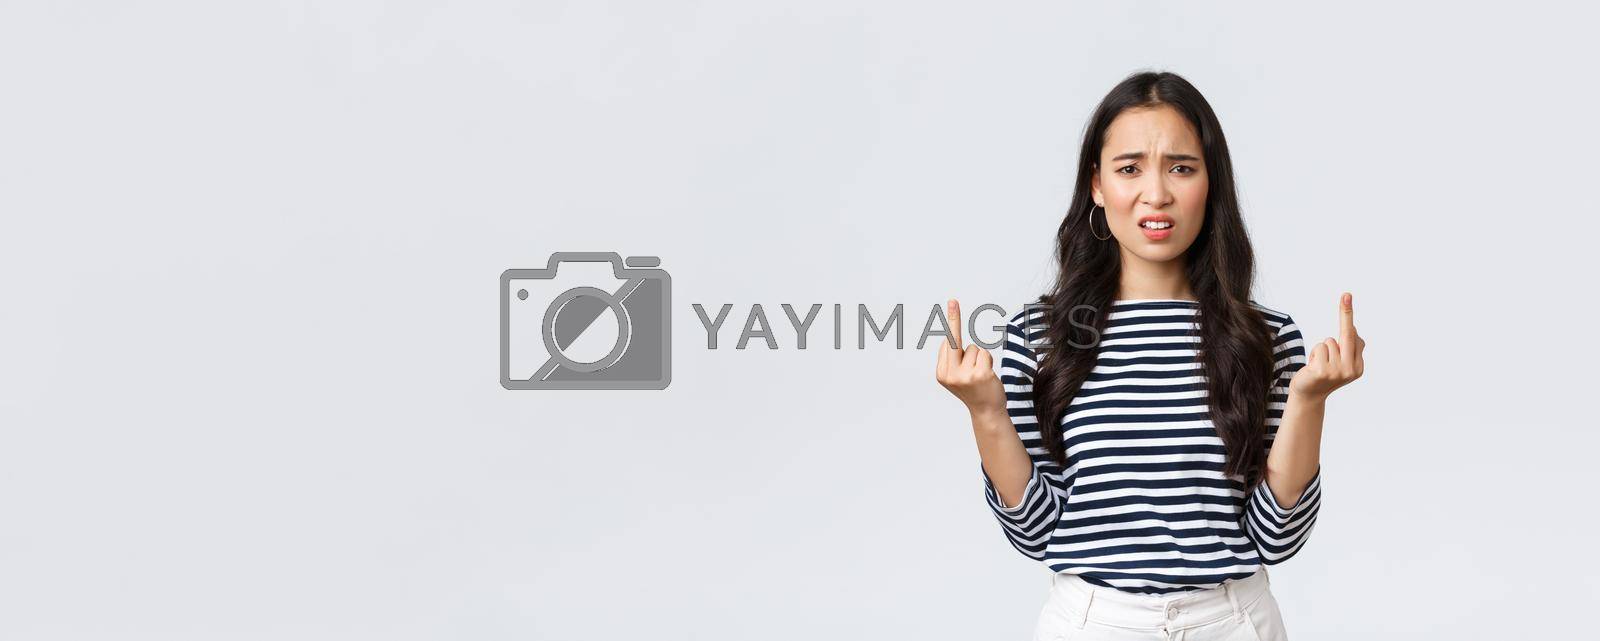 Lifestyle, beauty and fashion, people emotions concept. Annoyed pissed-off asian woman stare bothered and displeased, showing middle-fingers careless what people say, white background.